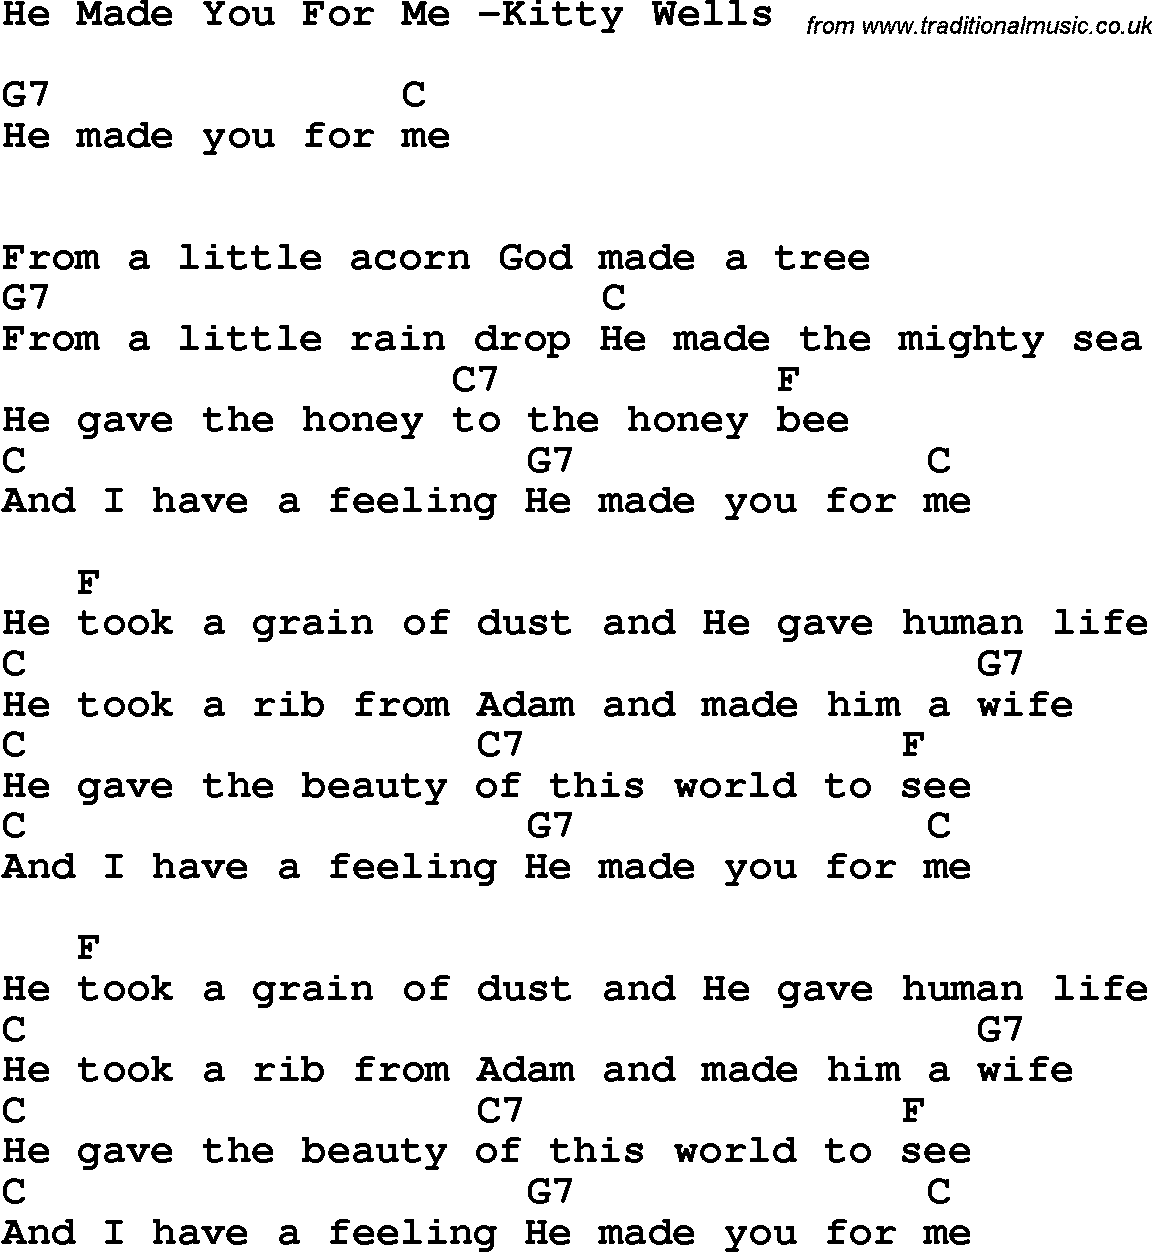 Country, Southern and Bluegrass Gospel Song He Made You For Me -Kitty Wells lyrics and chords